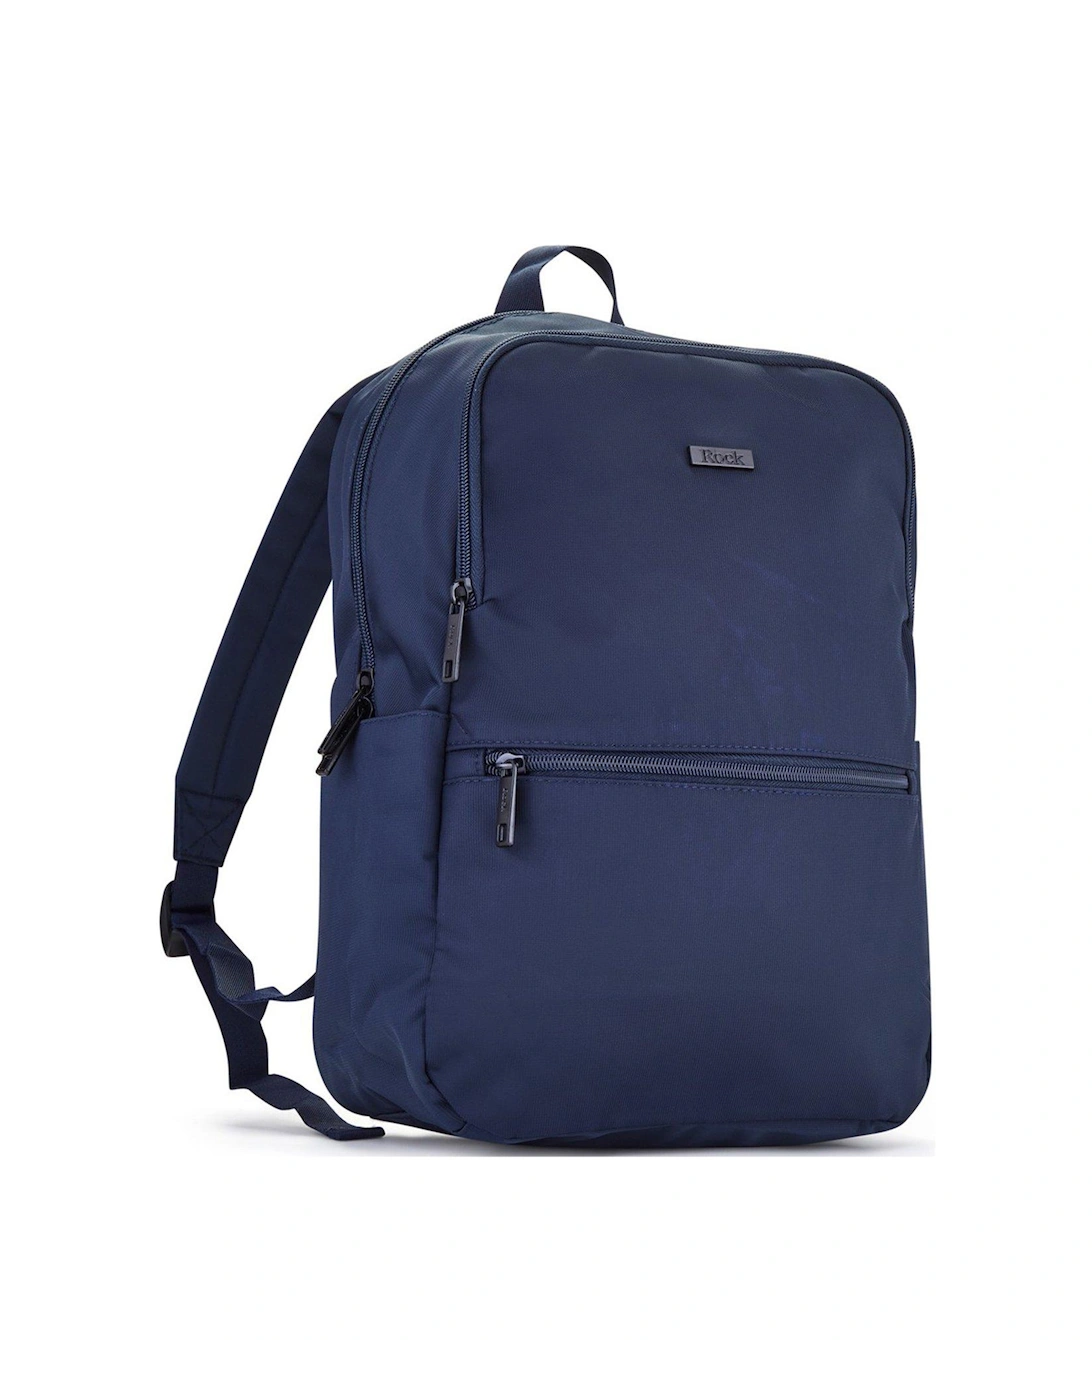 Rock Platinum Lightweight On-Board Under Seat Compliant Backpack - Navy, 3 of 2